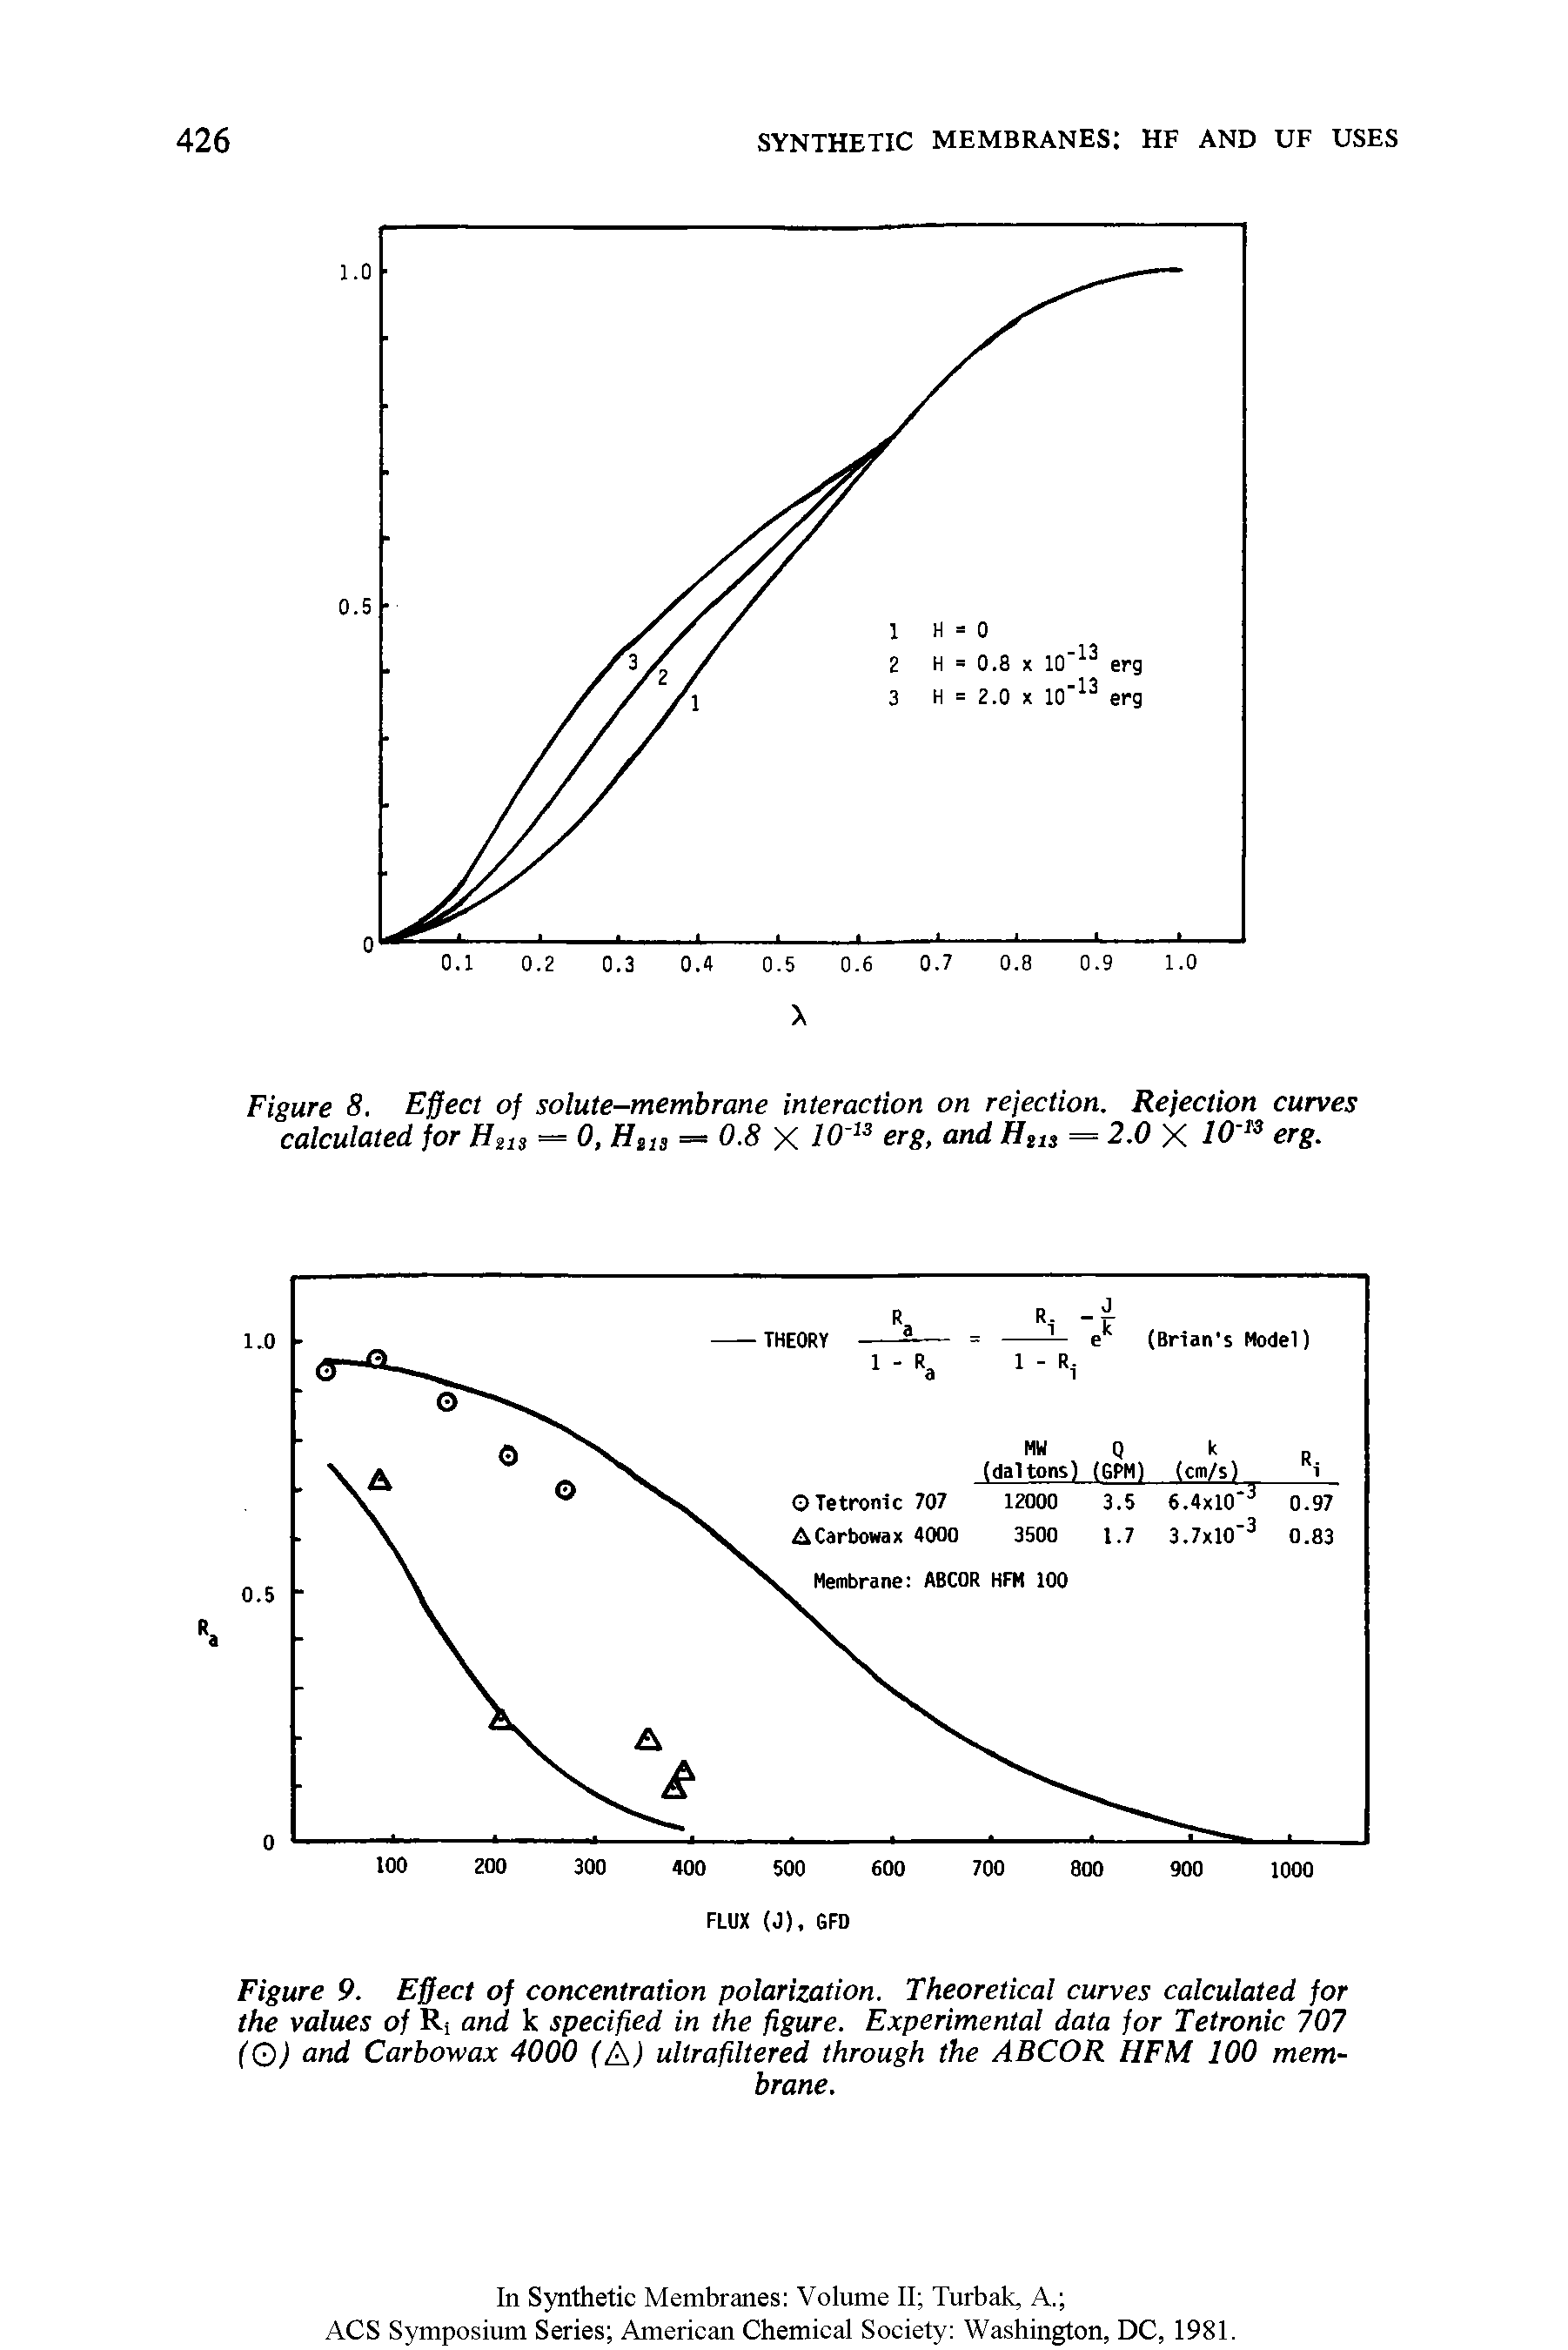 Figure 8. Effect of solute-membrane interaction on rejection. Rejection curves calculated for Hub = 0, Hu, - 0.8 X erg, and H,u = 2.0 X erg.